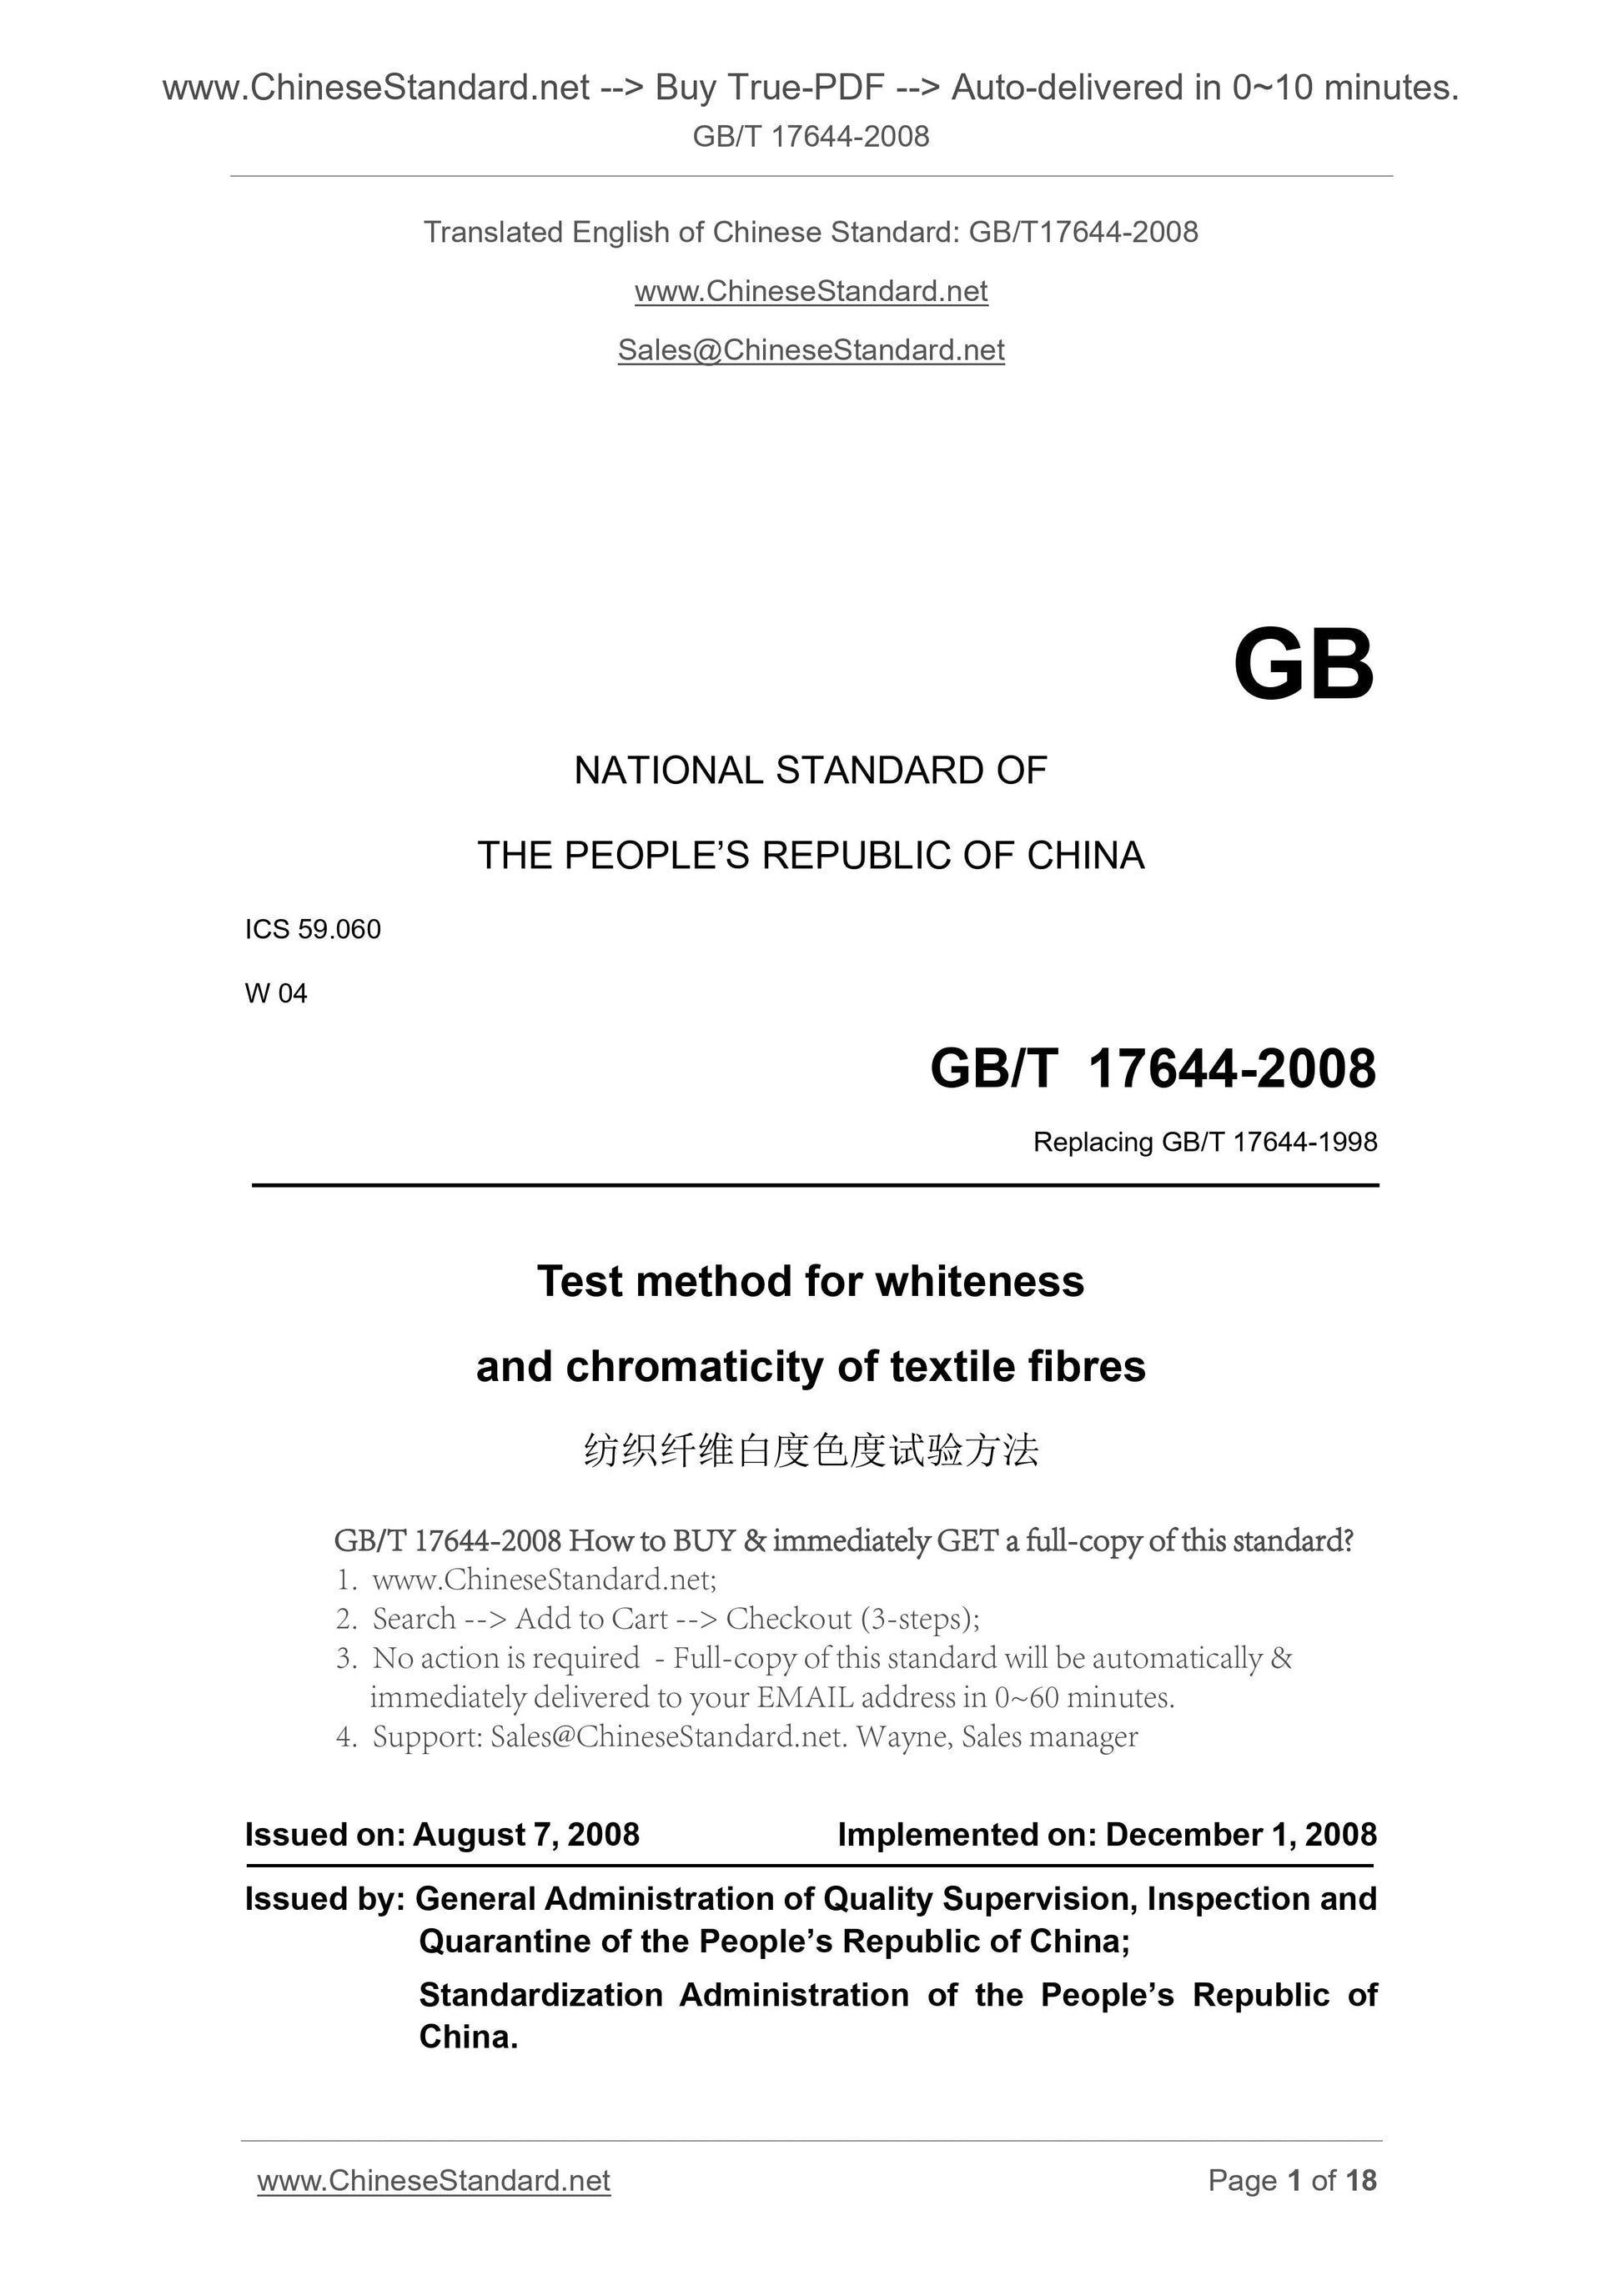 GB/T 17644-2008 Page 1